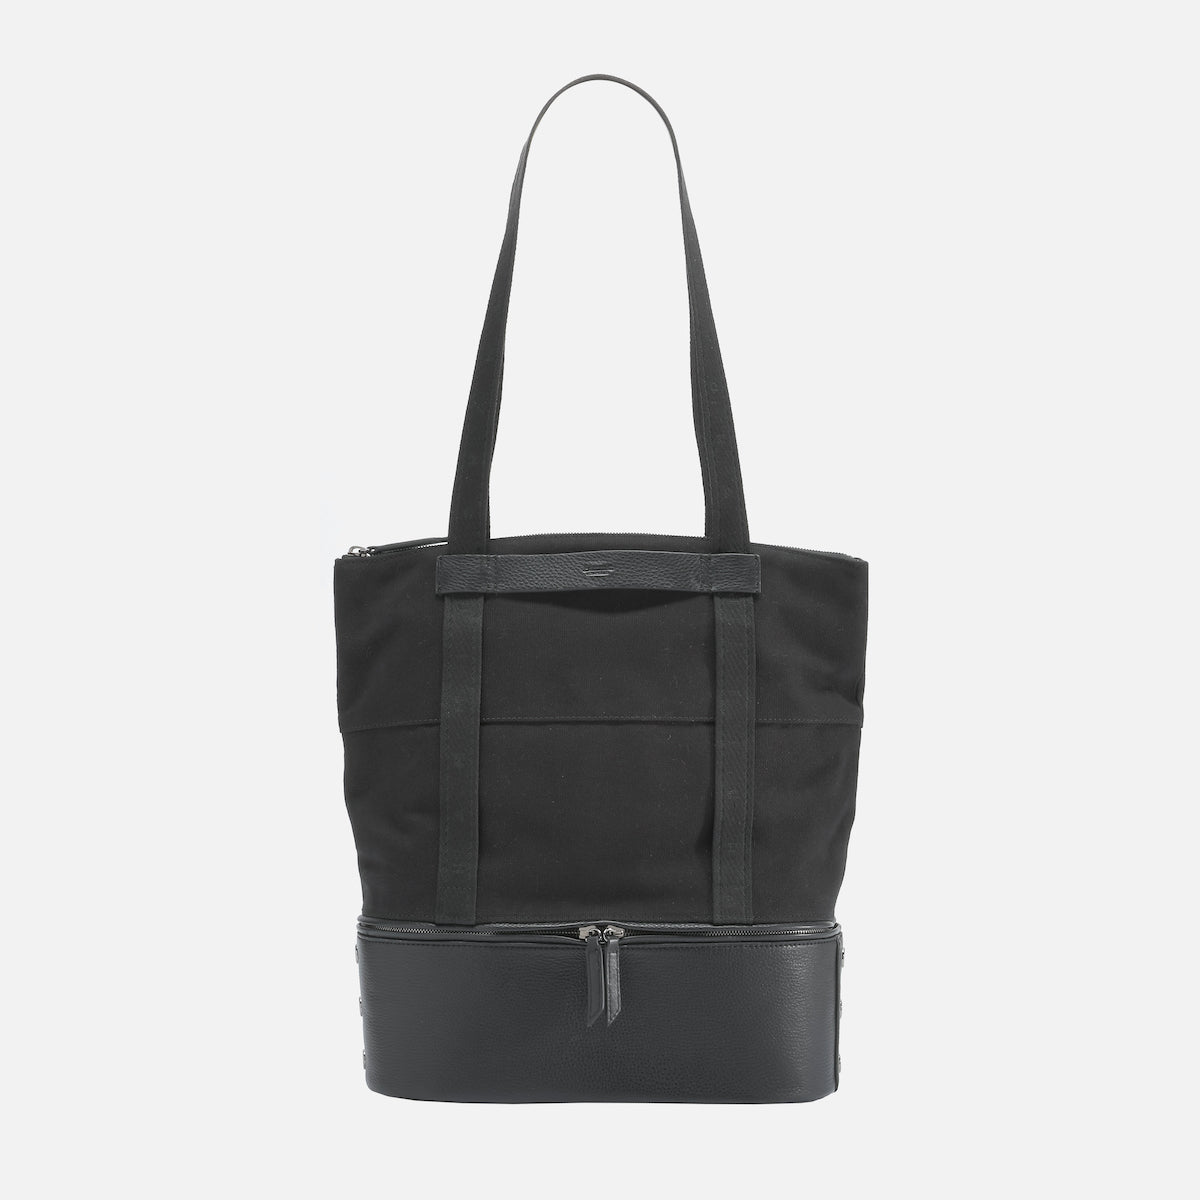 Women's Functional and Stylish Leather Tote Bags – Hammitt